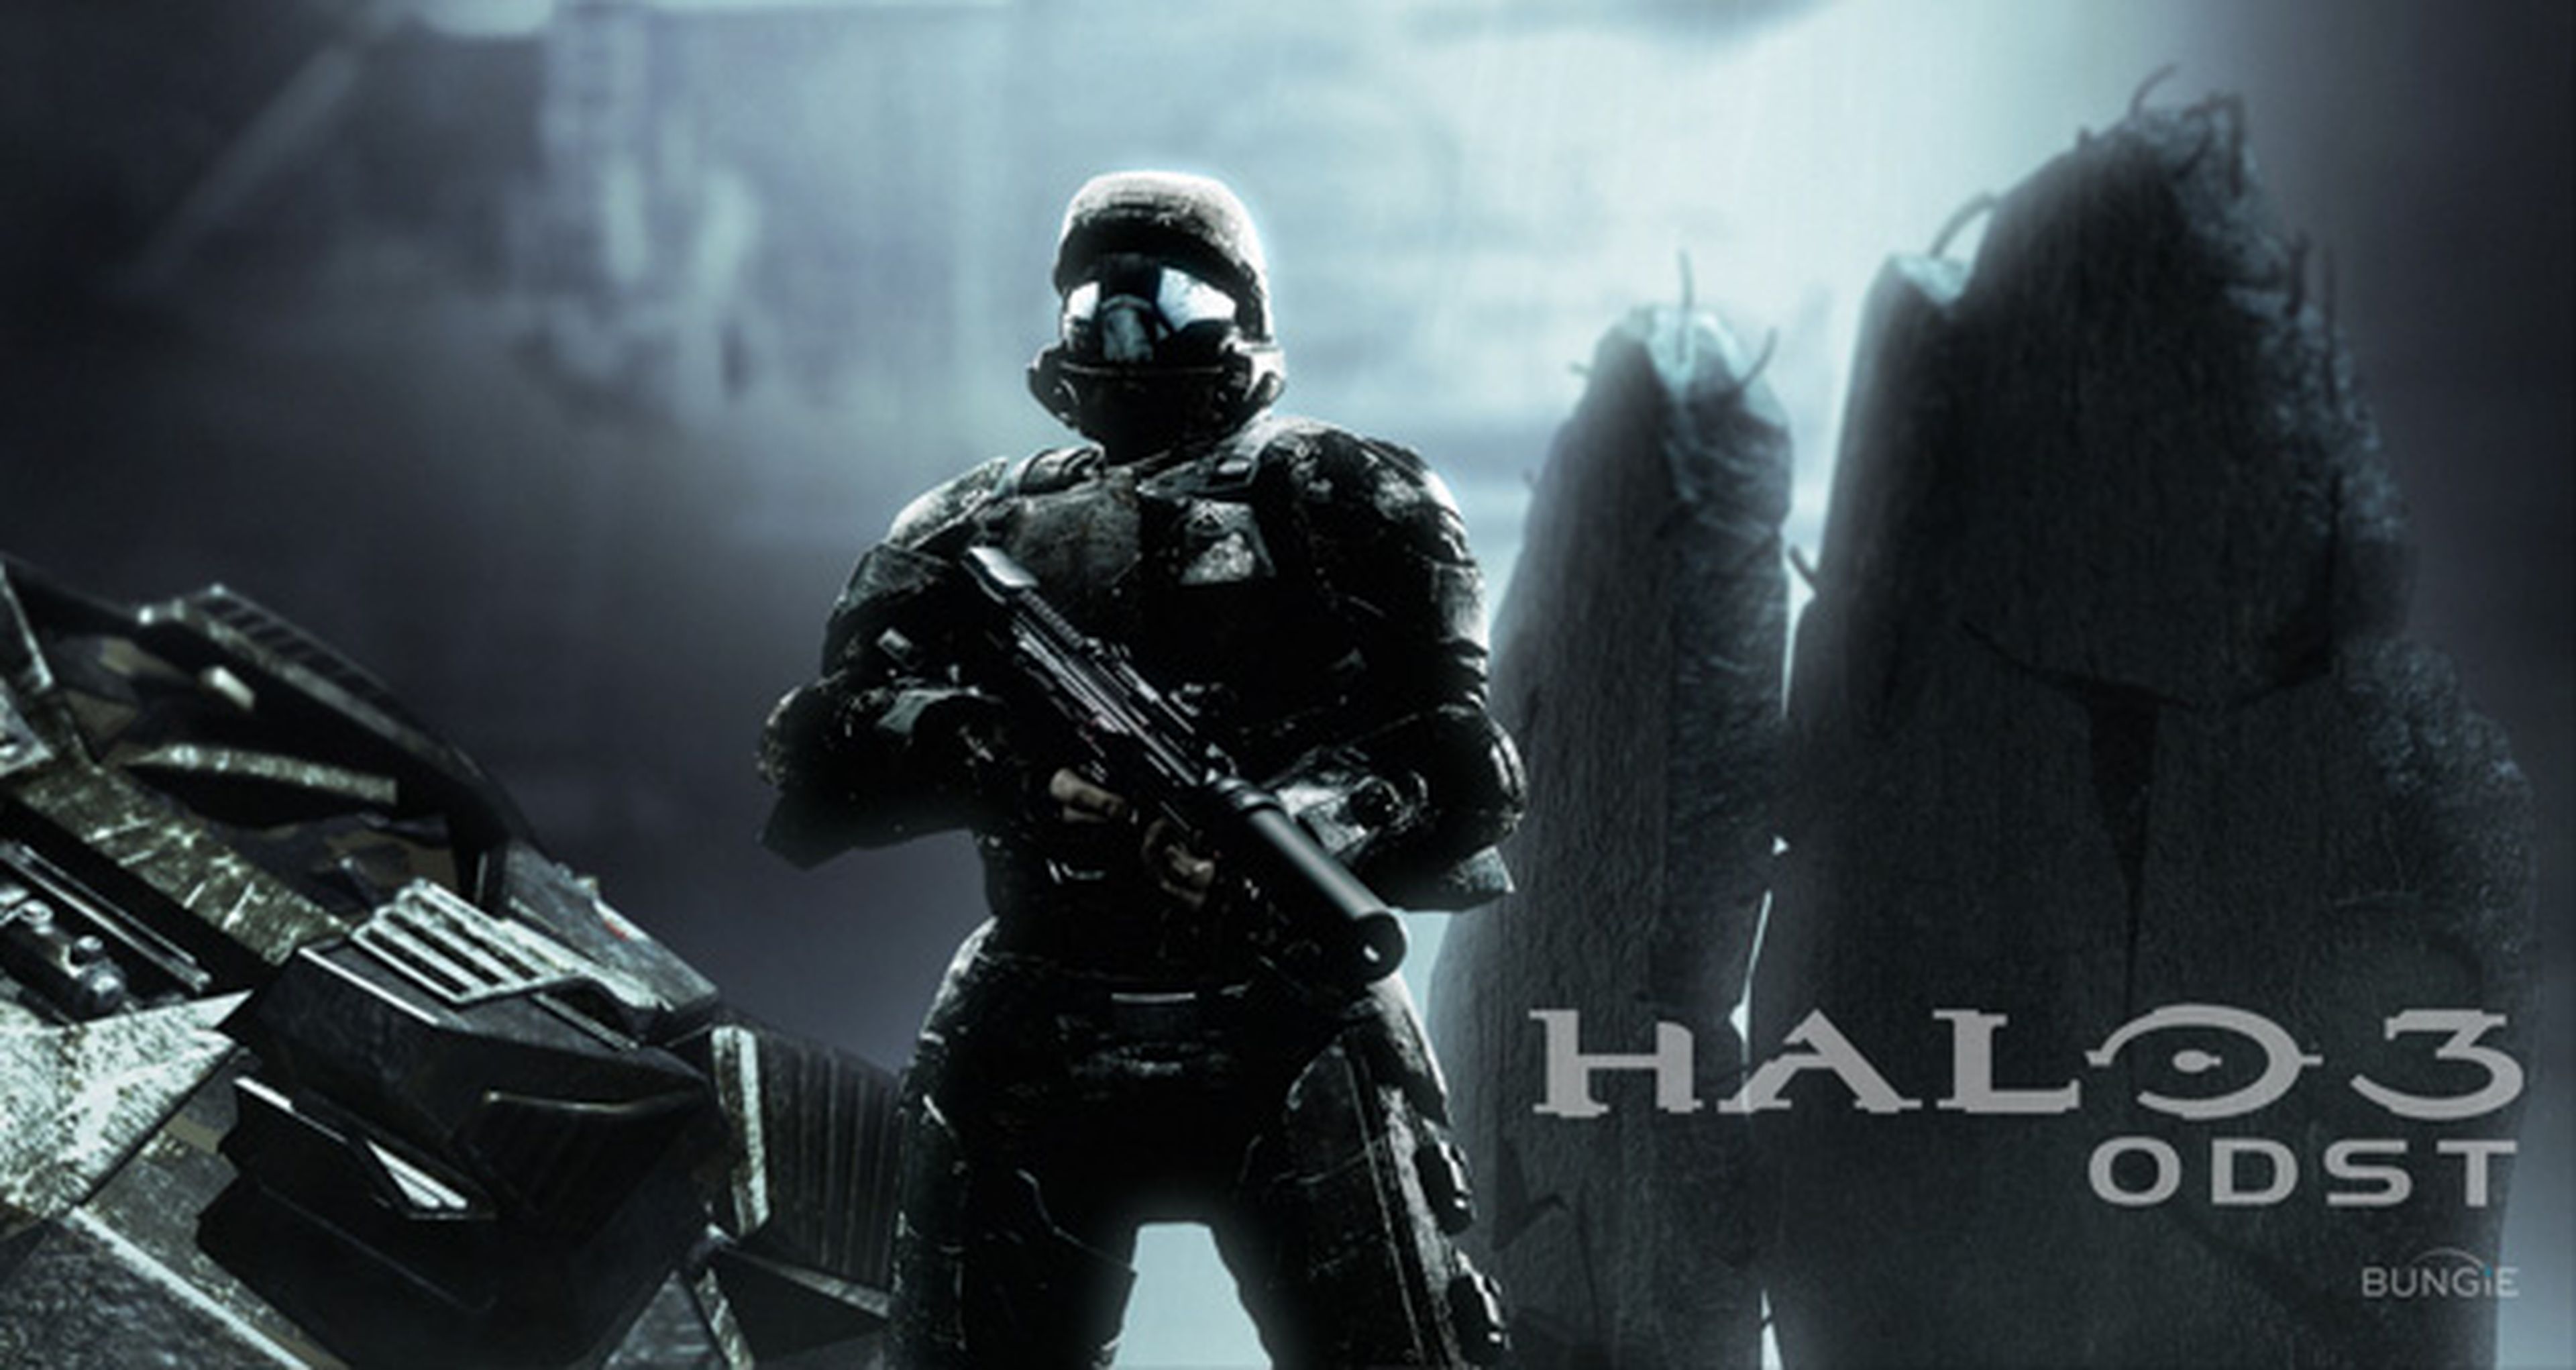 Halo 3 ODST llegará gratis a The Master Chief Collection